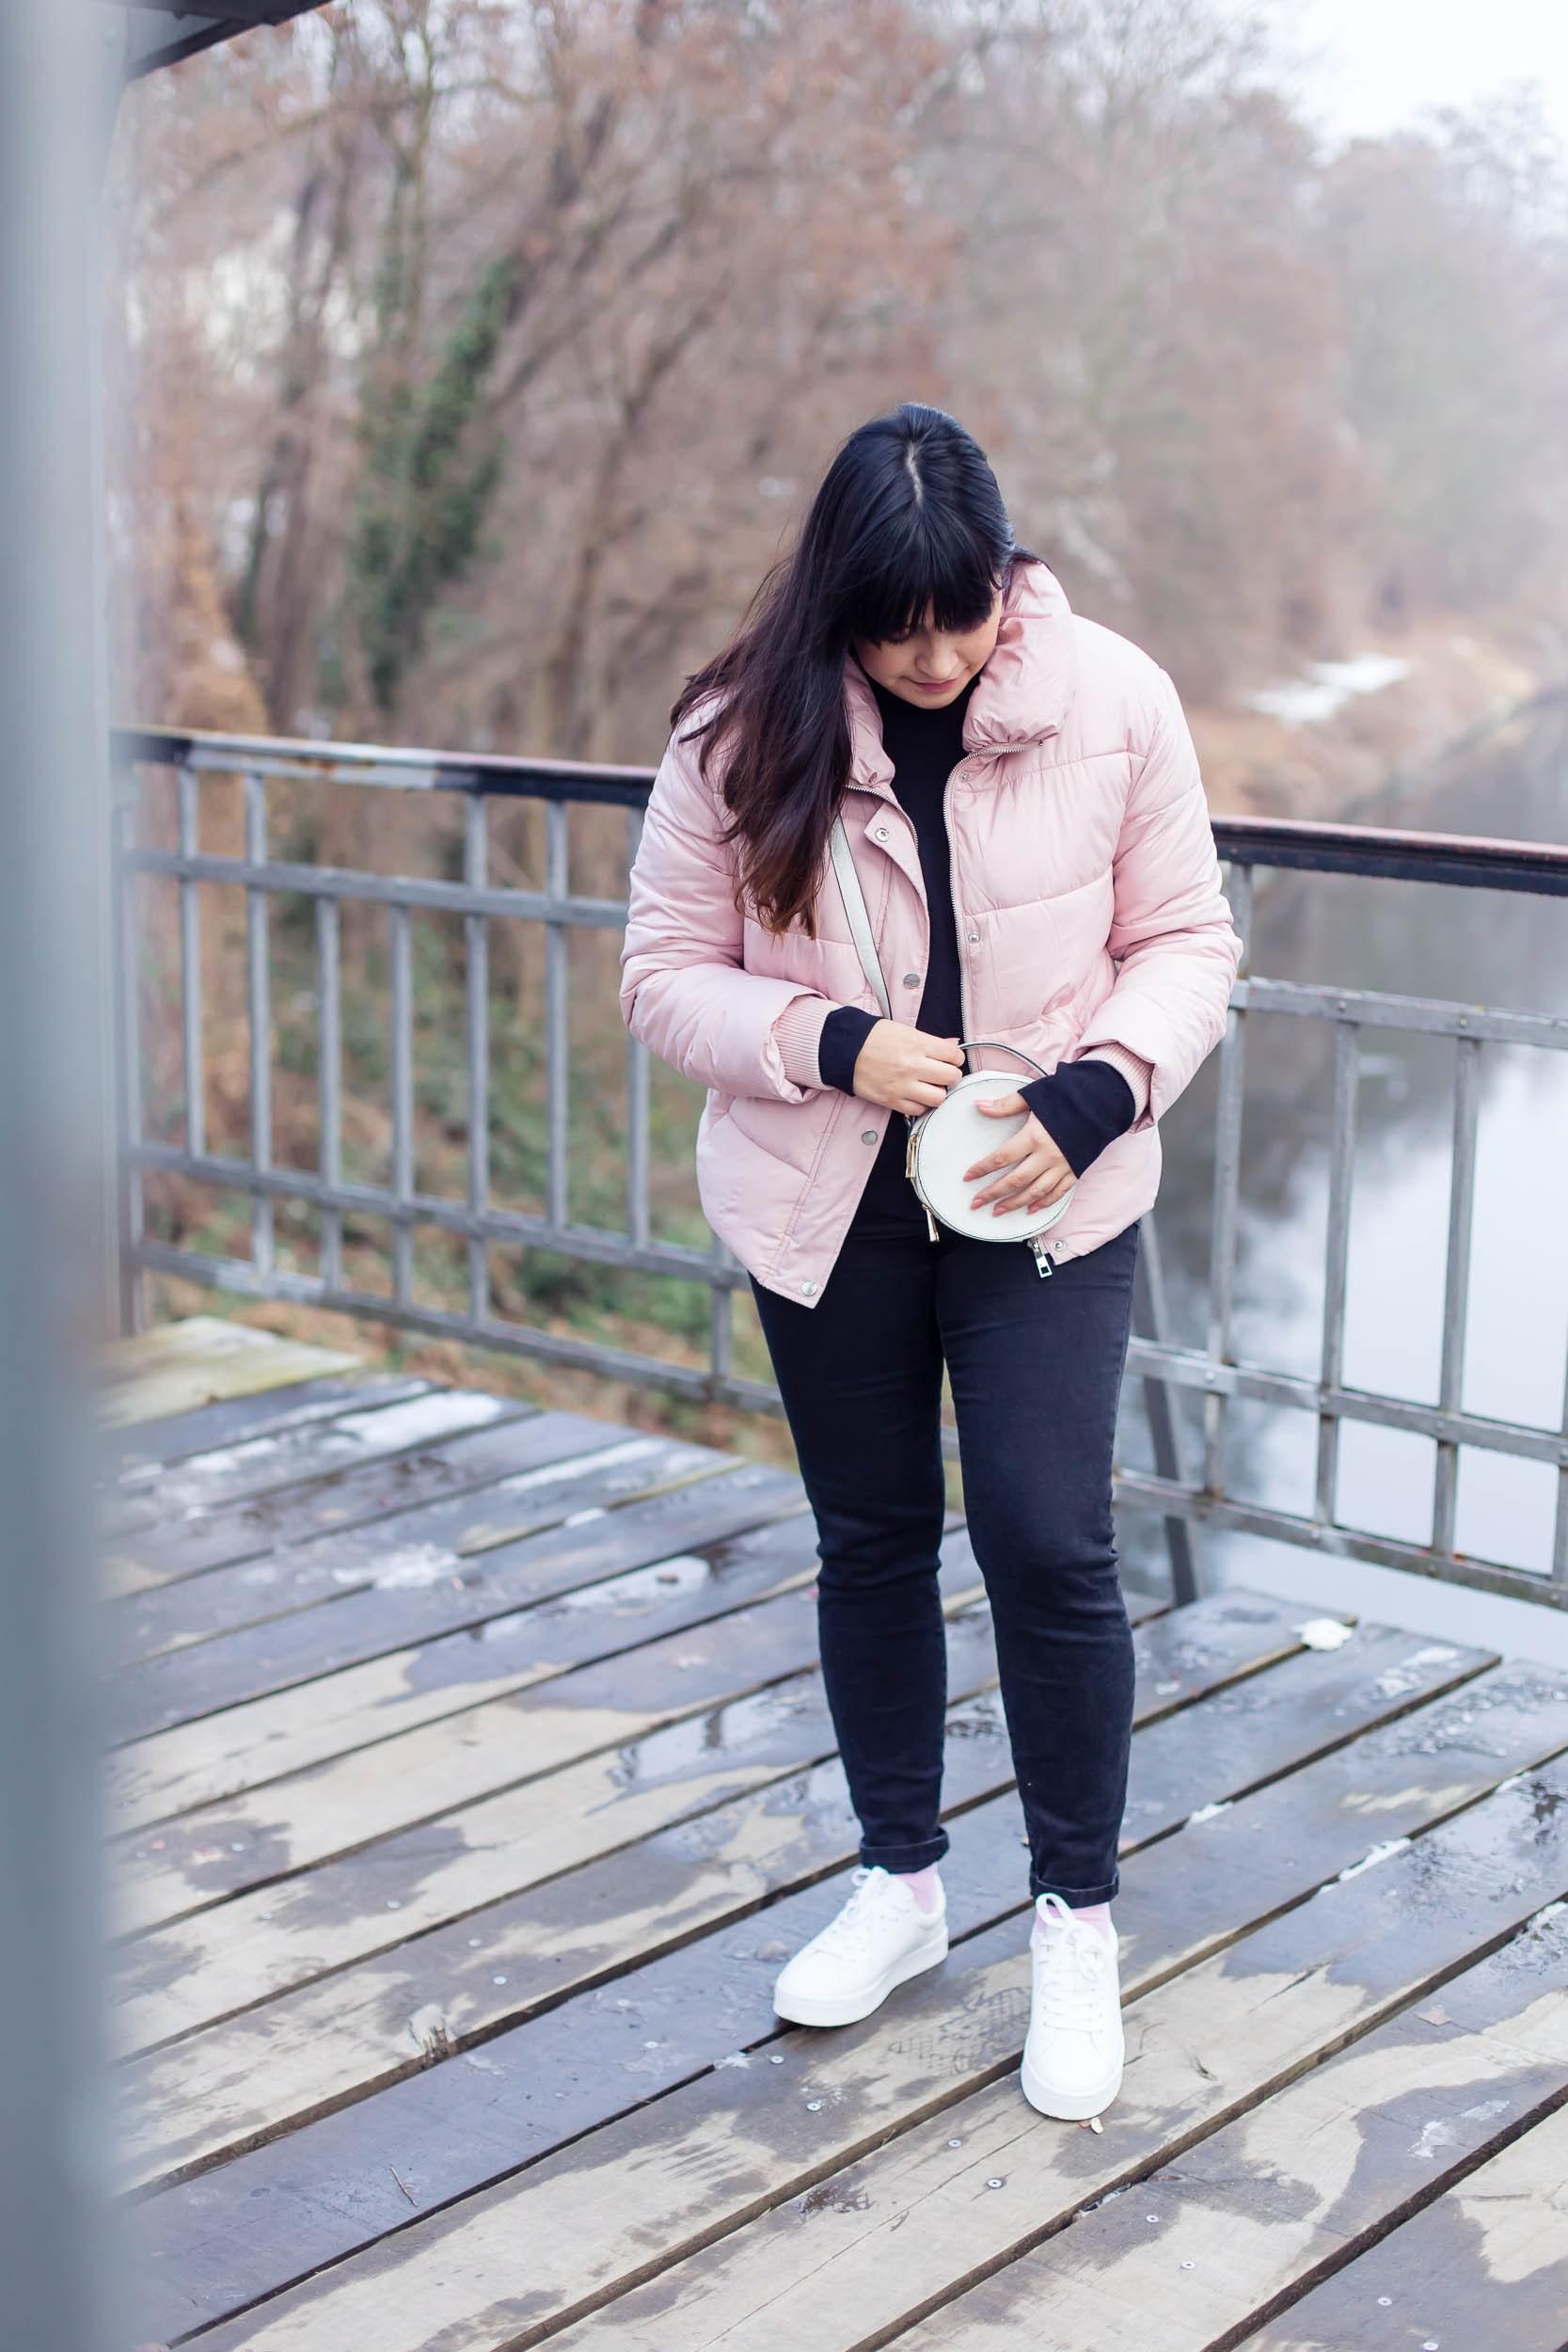 Wie gefällt euch der Look? #winteroutfit #ootd #fashion #outfit #rosa #pink #winter #style